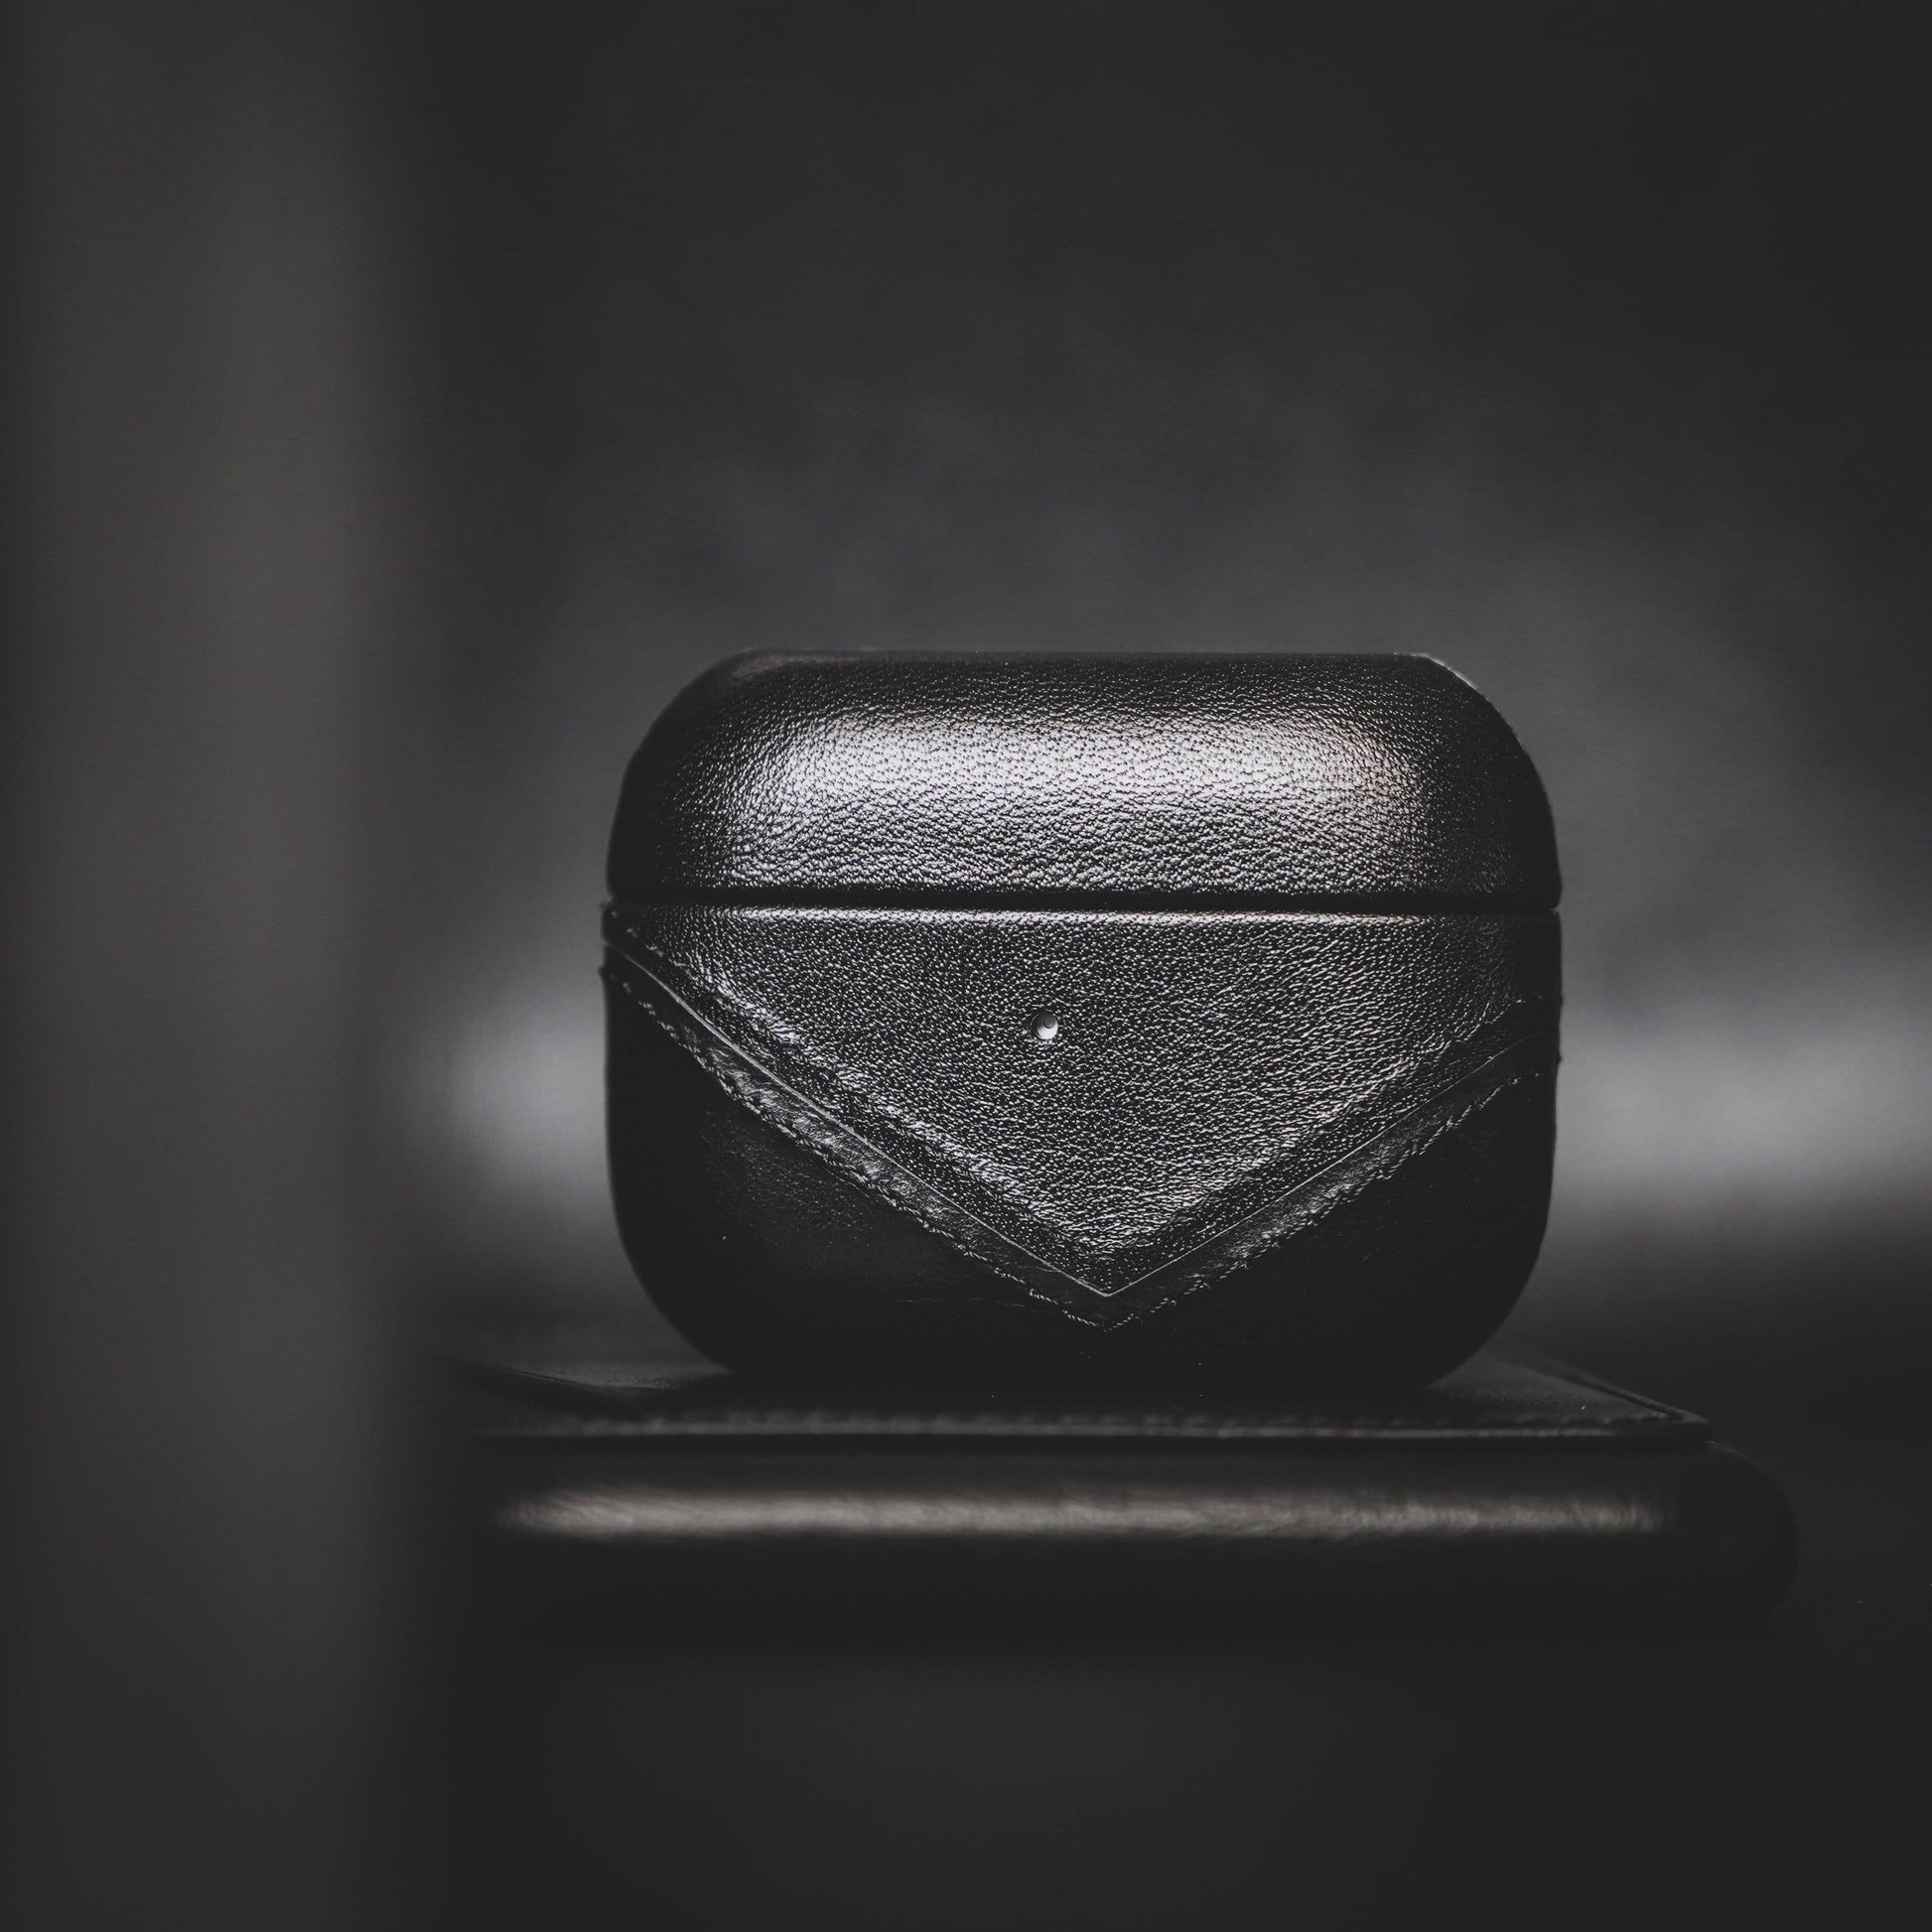 Leather AirPods Cases - BLACK EDITION by Bullstrap - The Hammer Sports